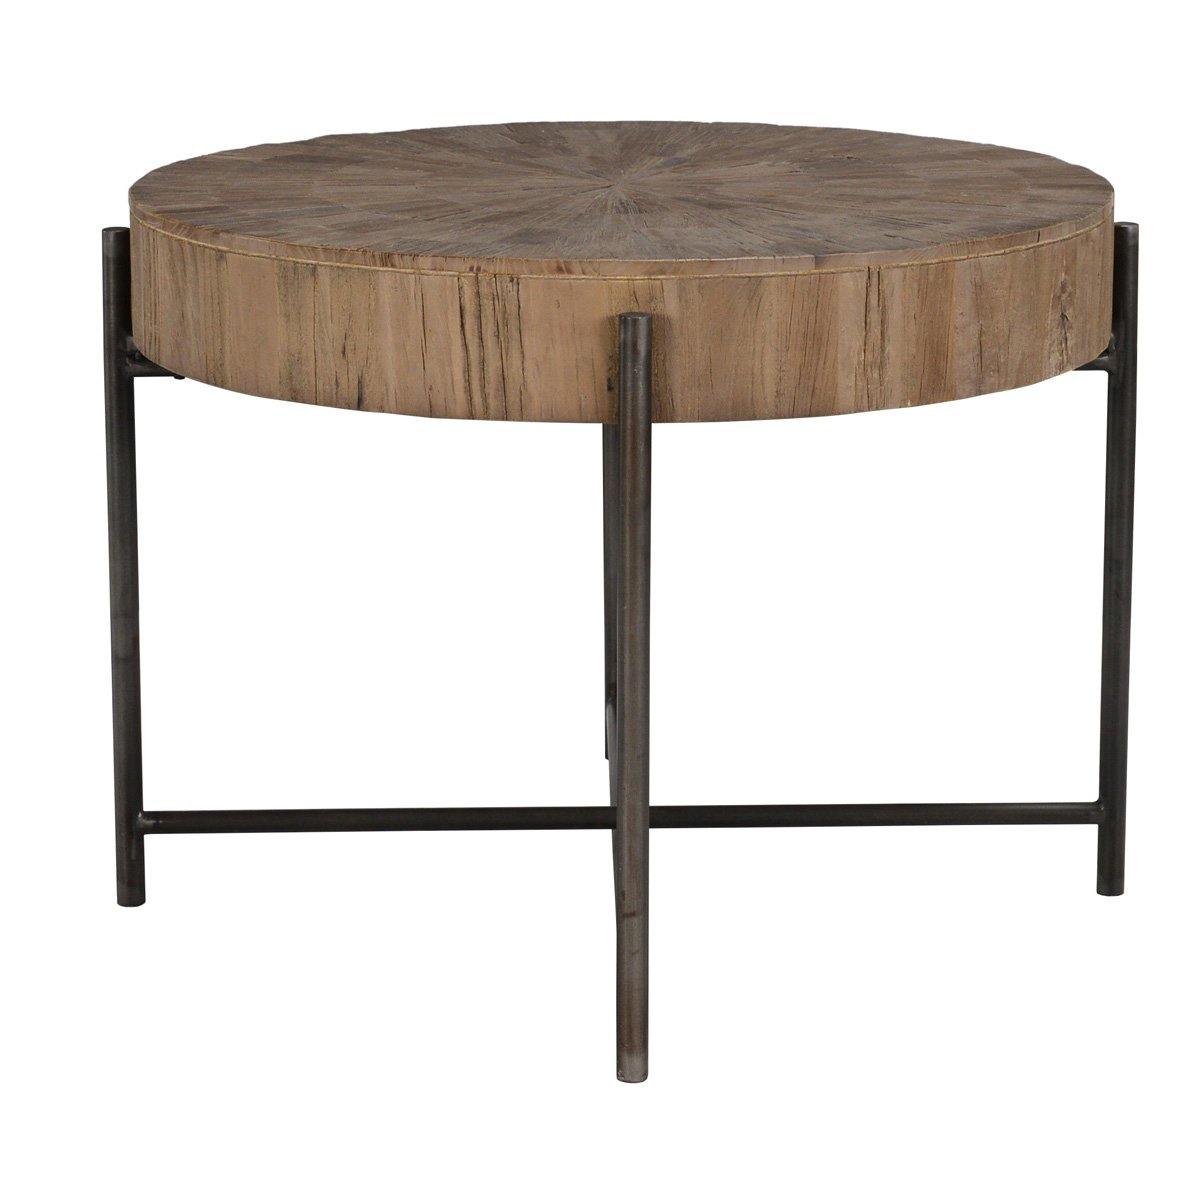 Molly 28" Coffee Table - The Tin Roof Furniture